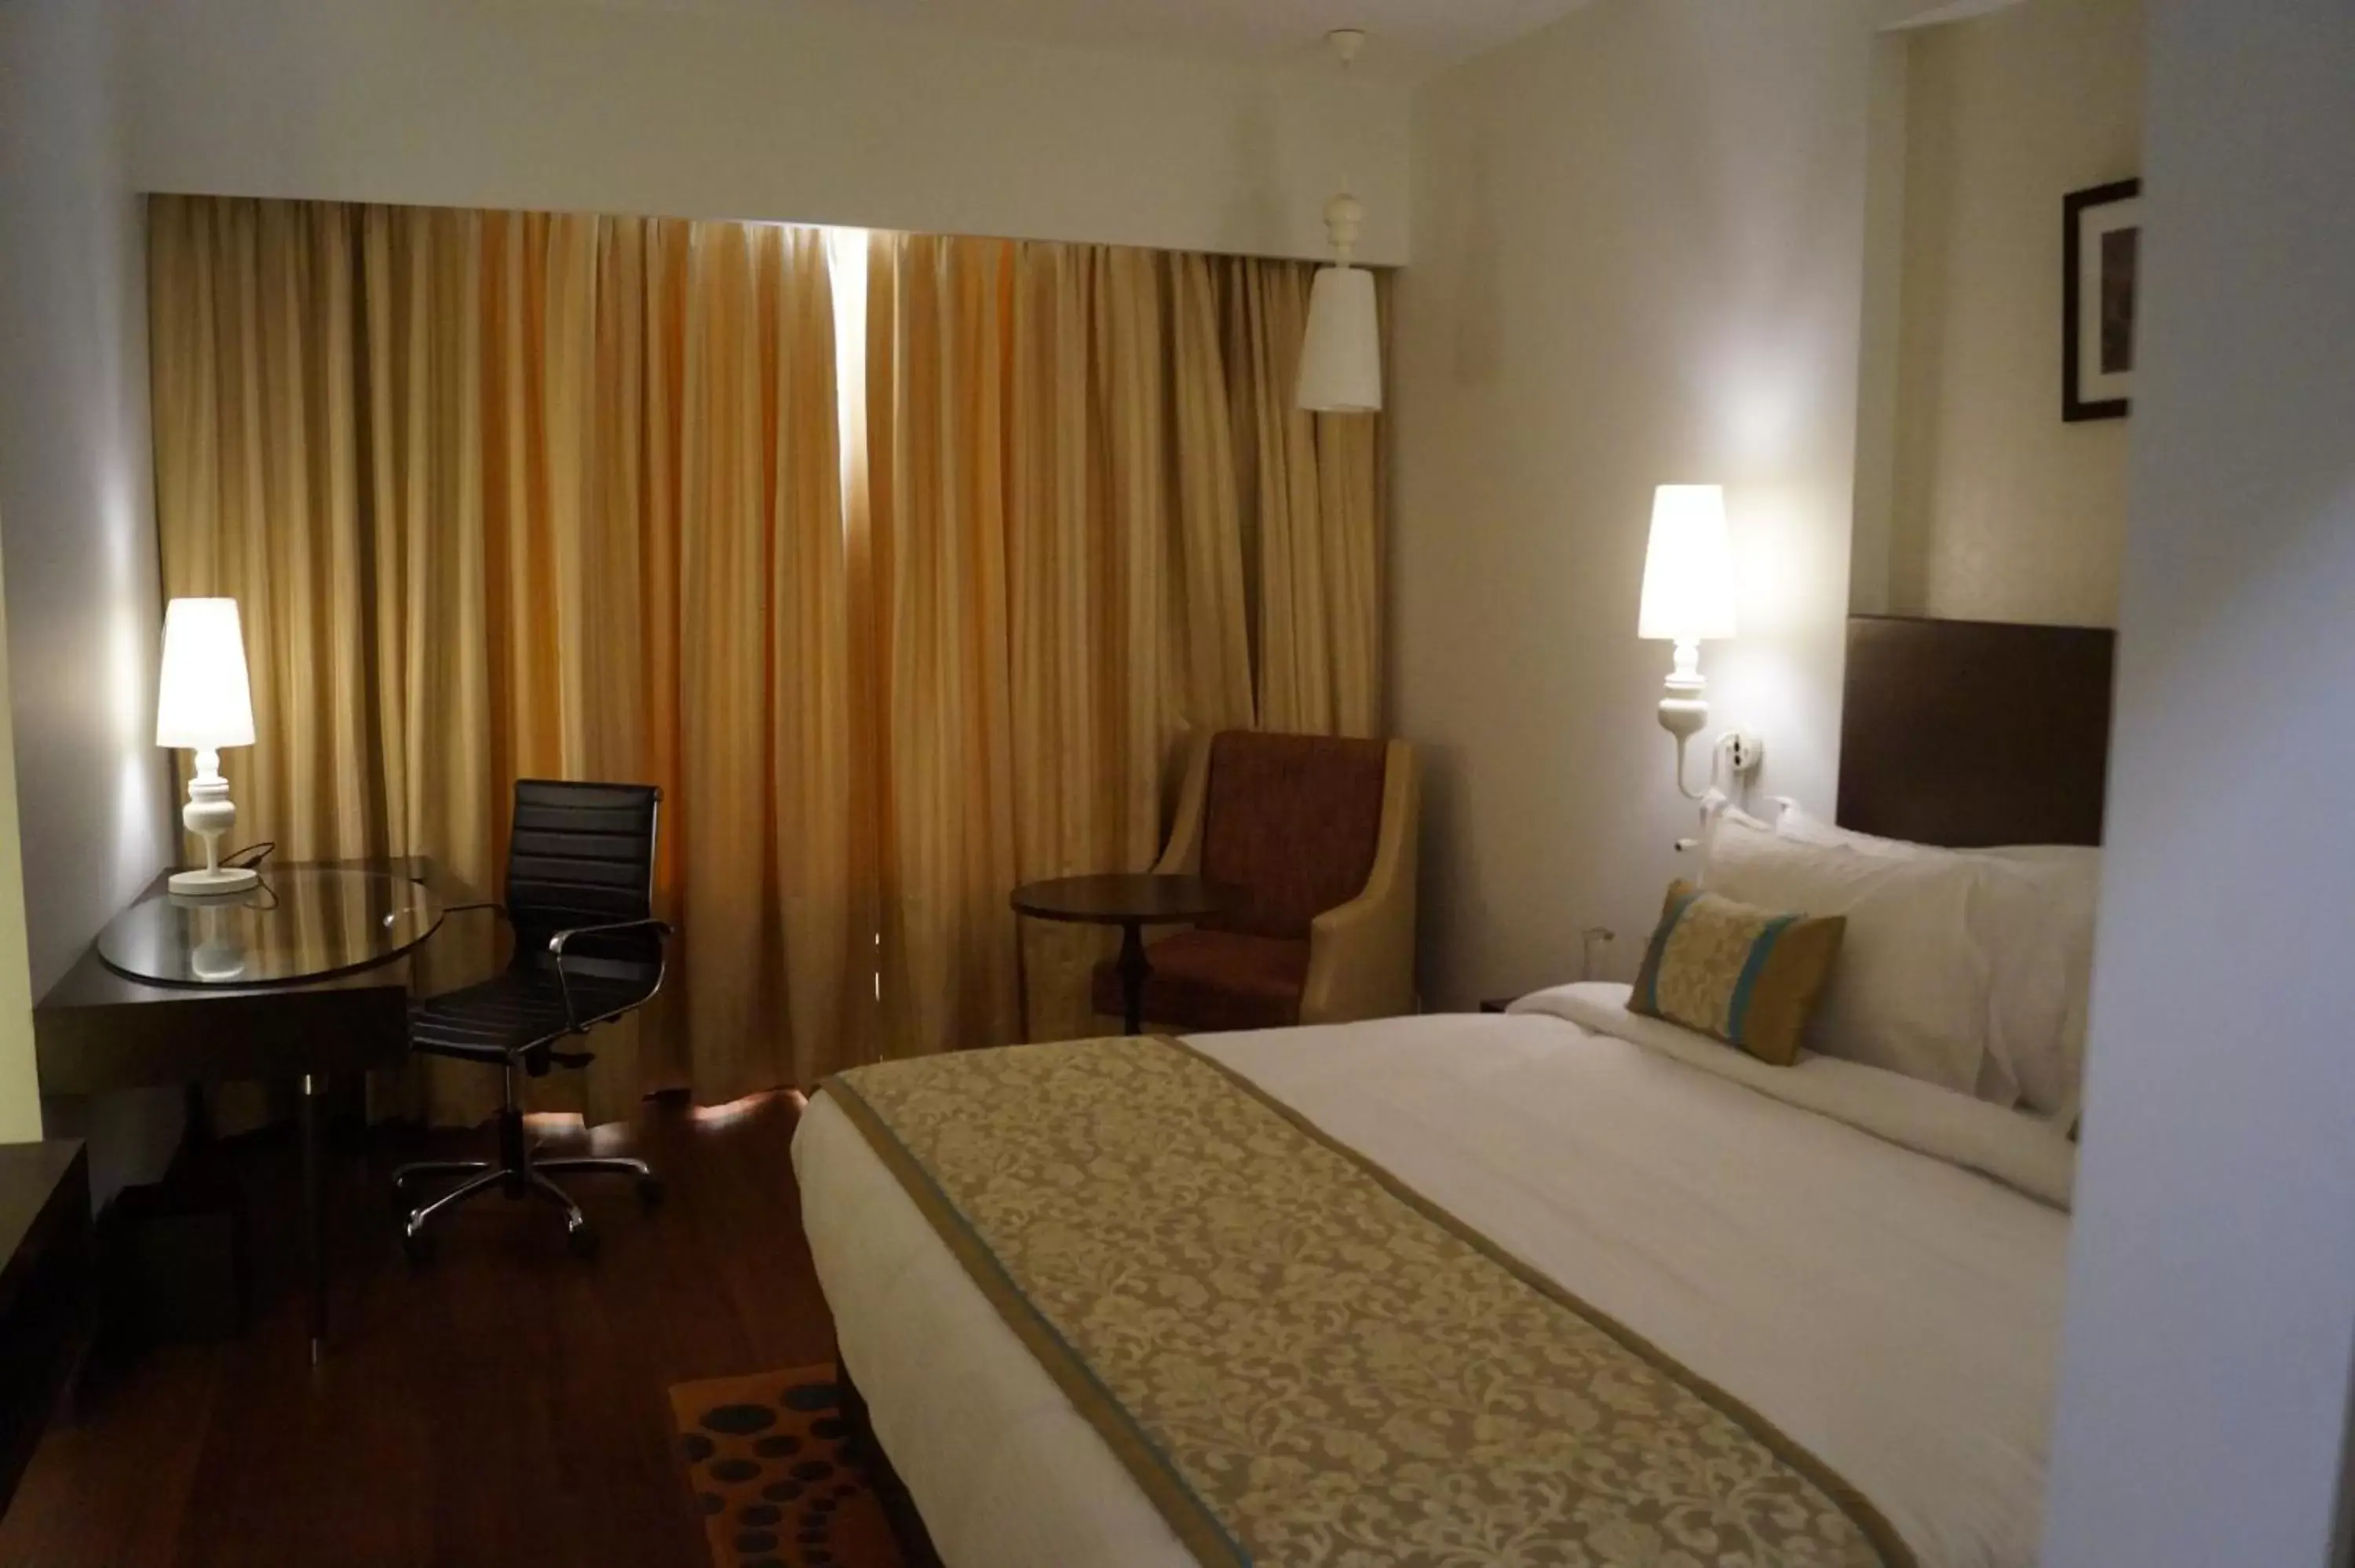 Bedroom, Bed in Country Inn & Suites by Radisson Kota